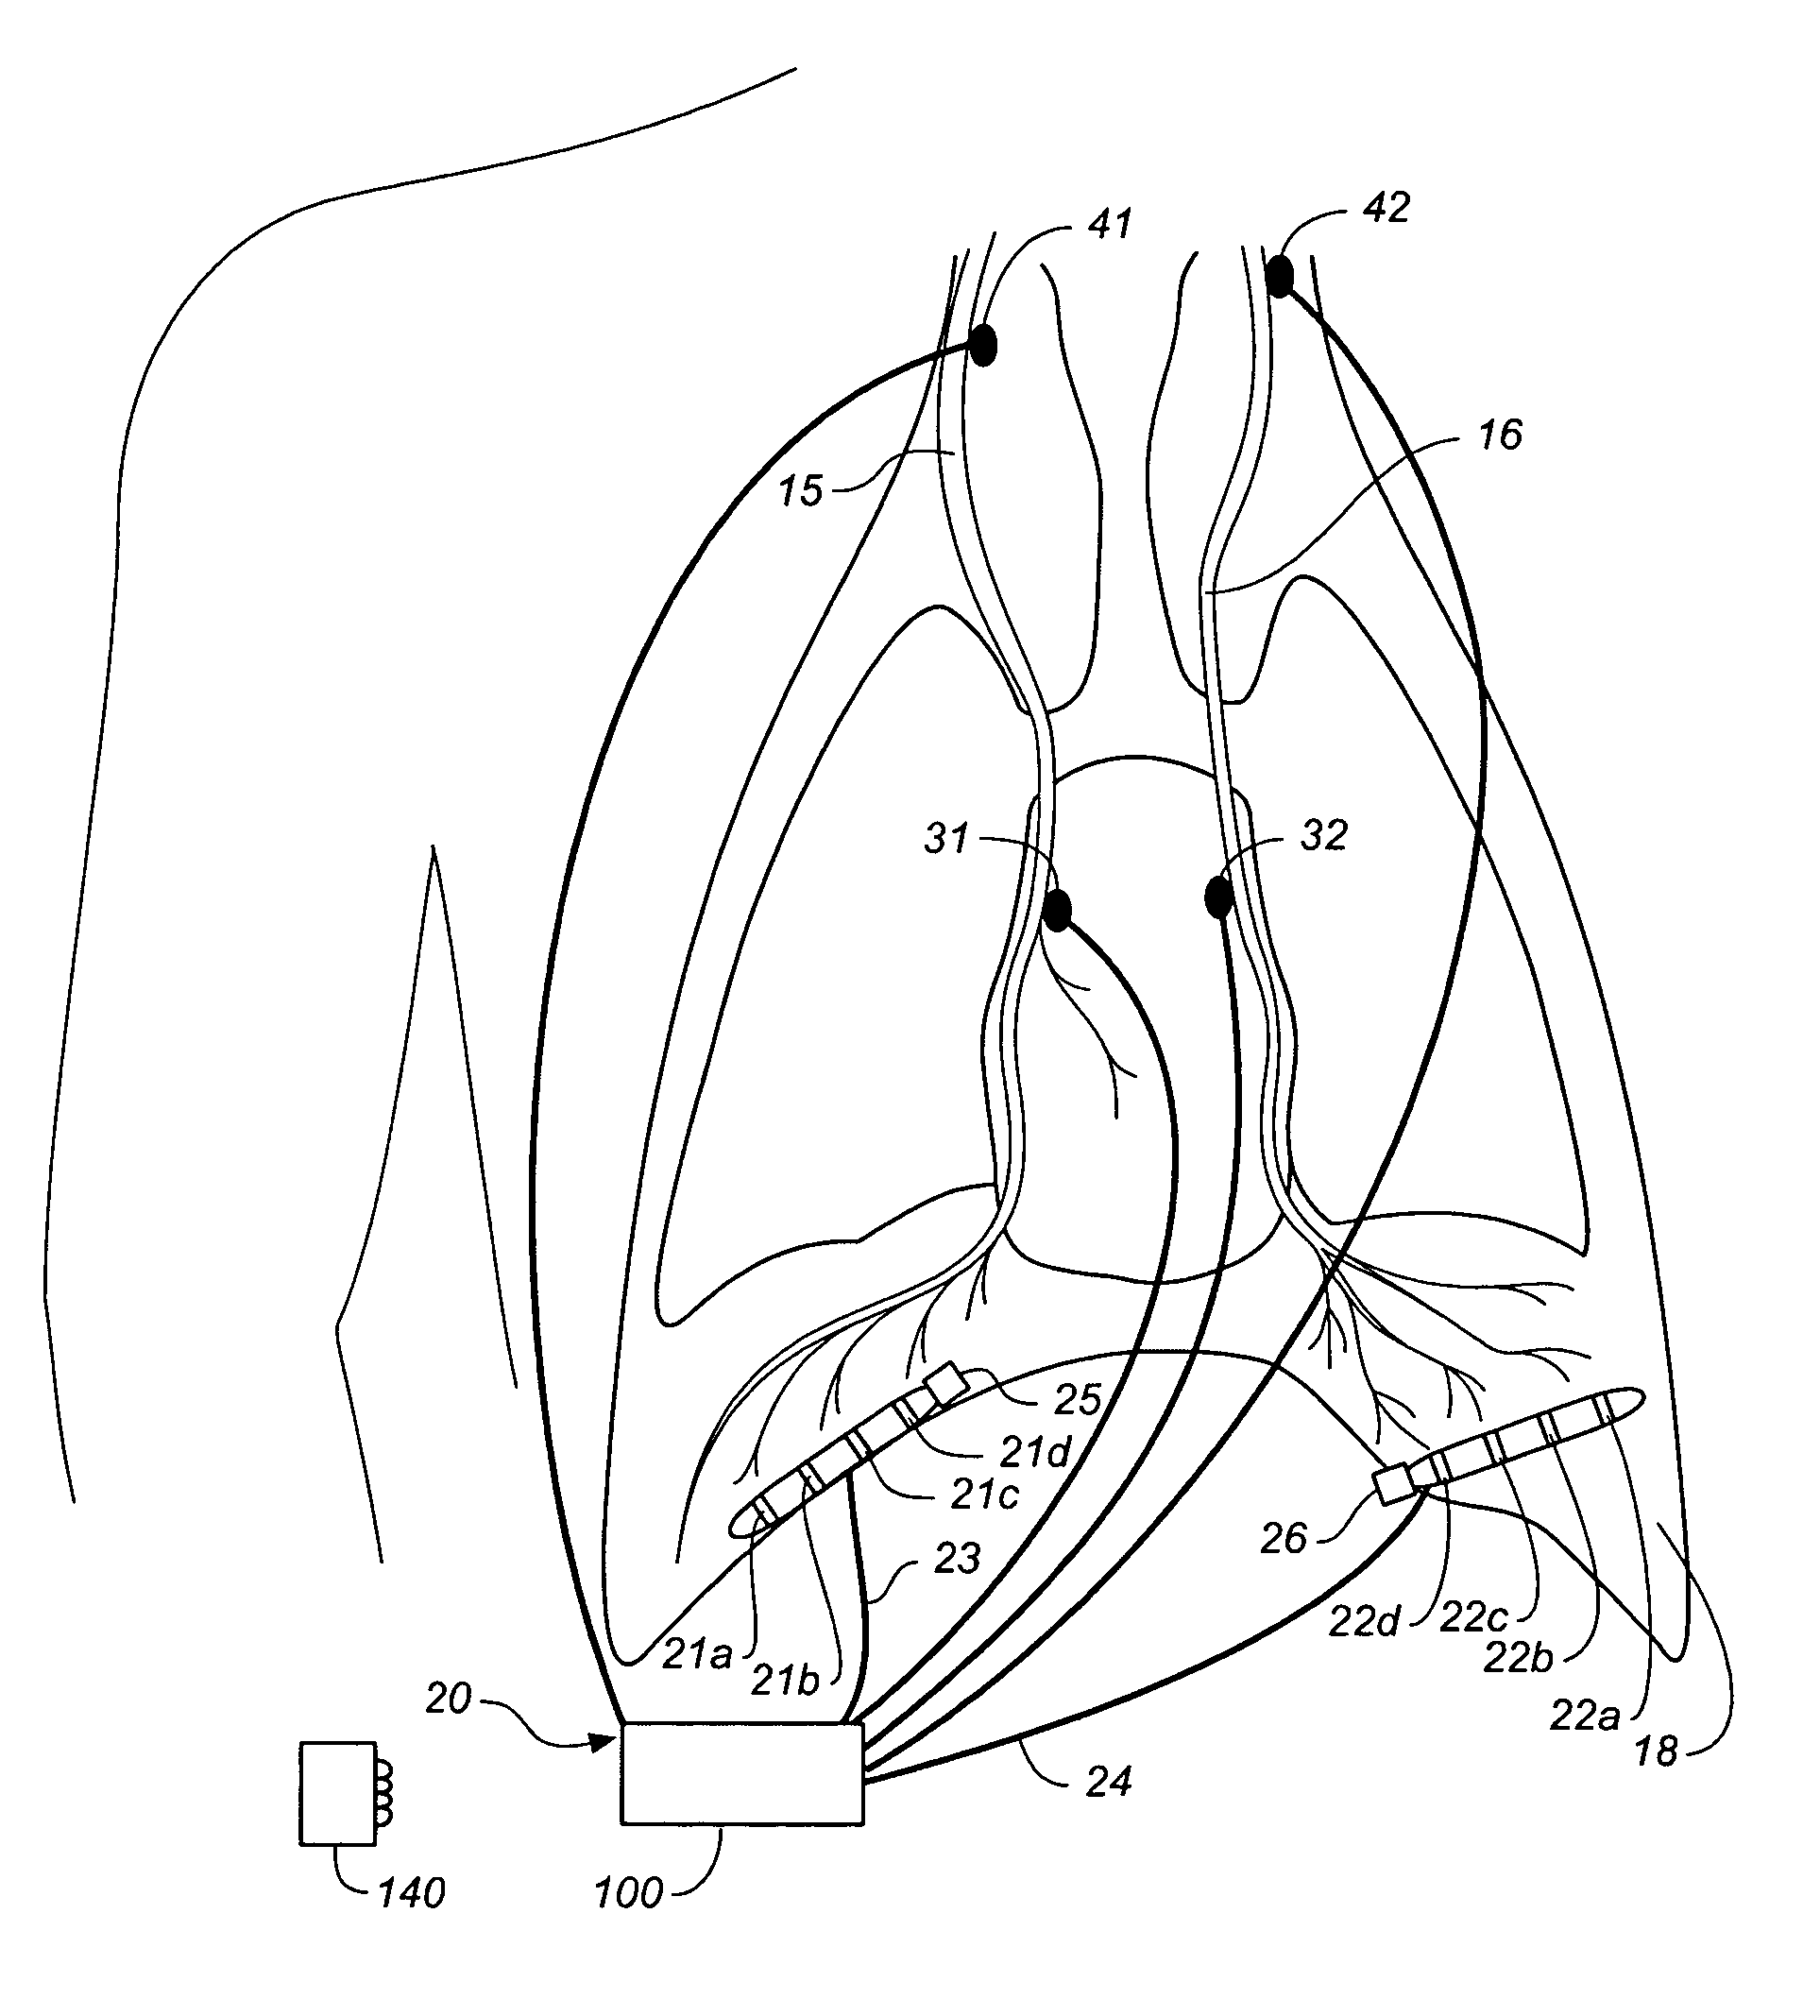 Device and method for gradually controlling breathing